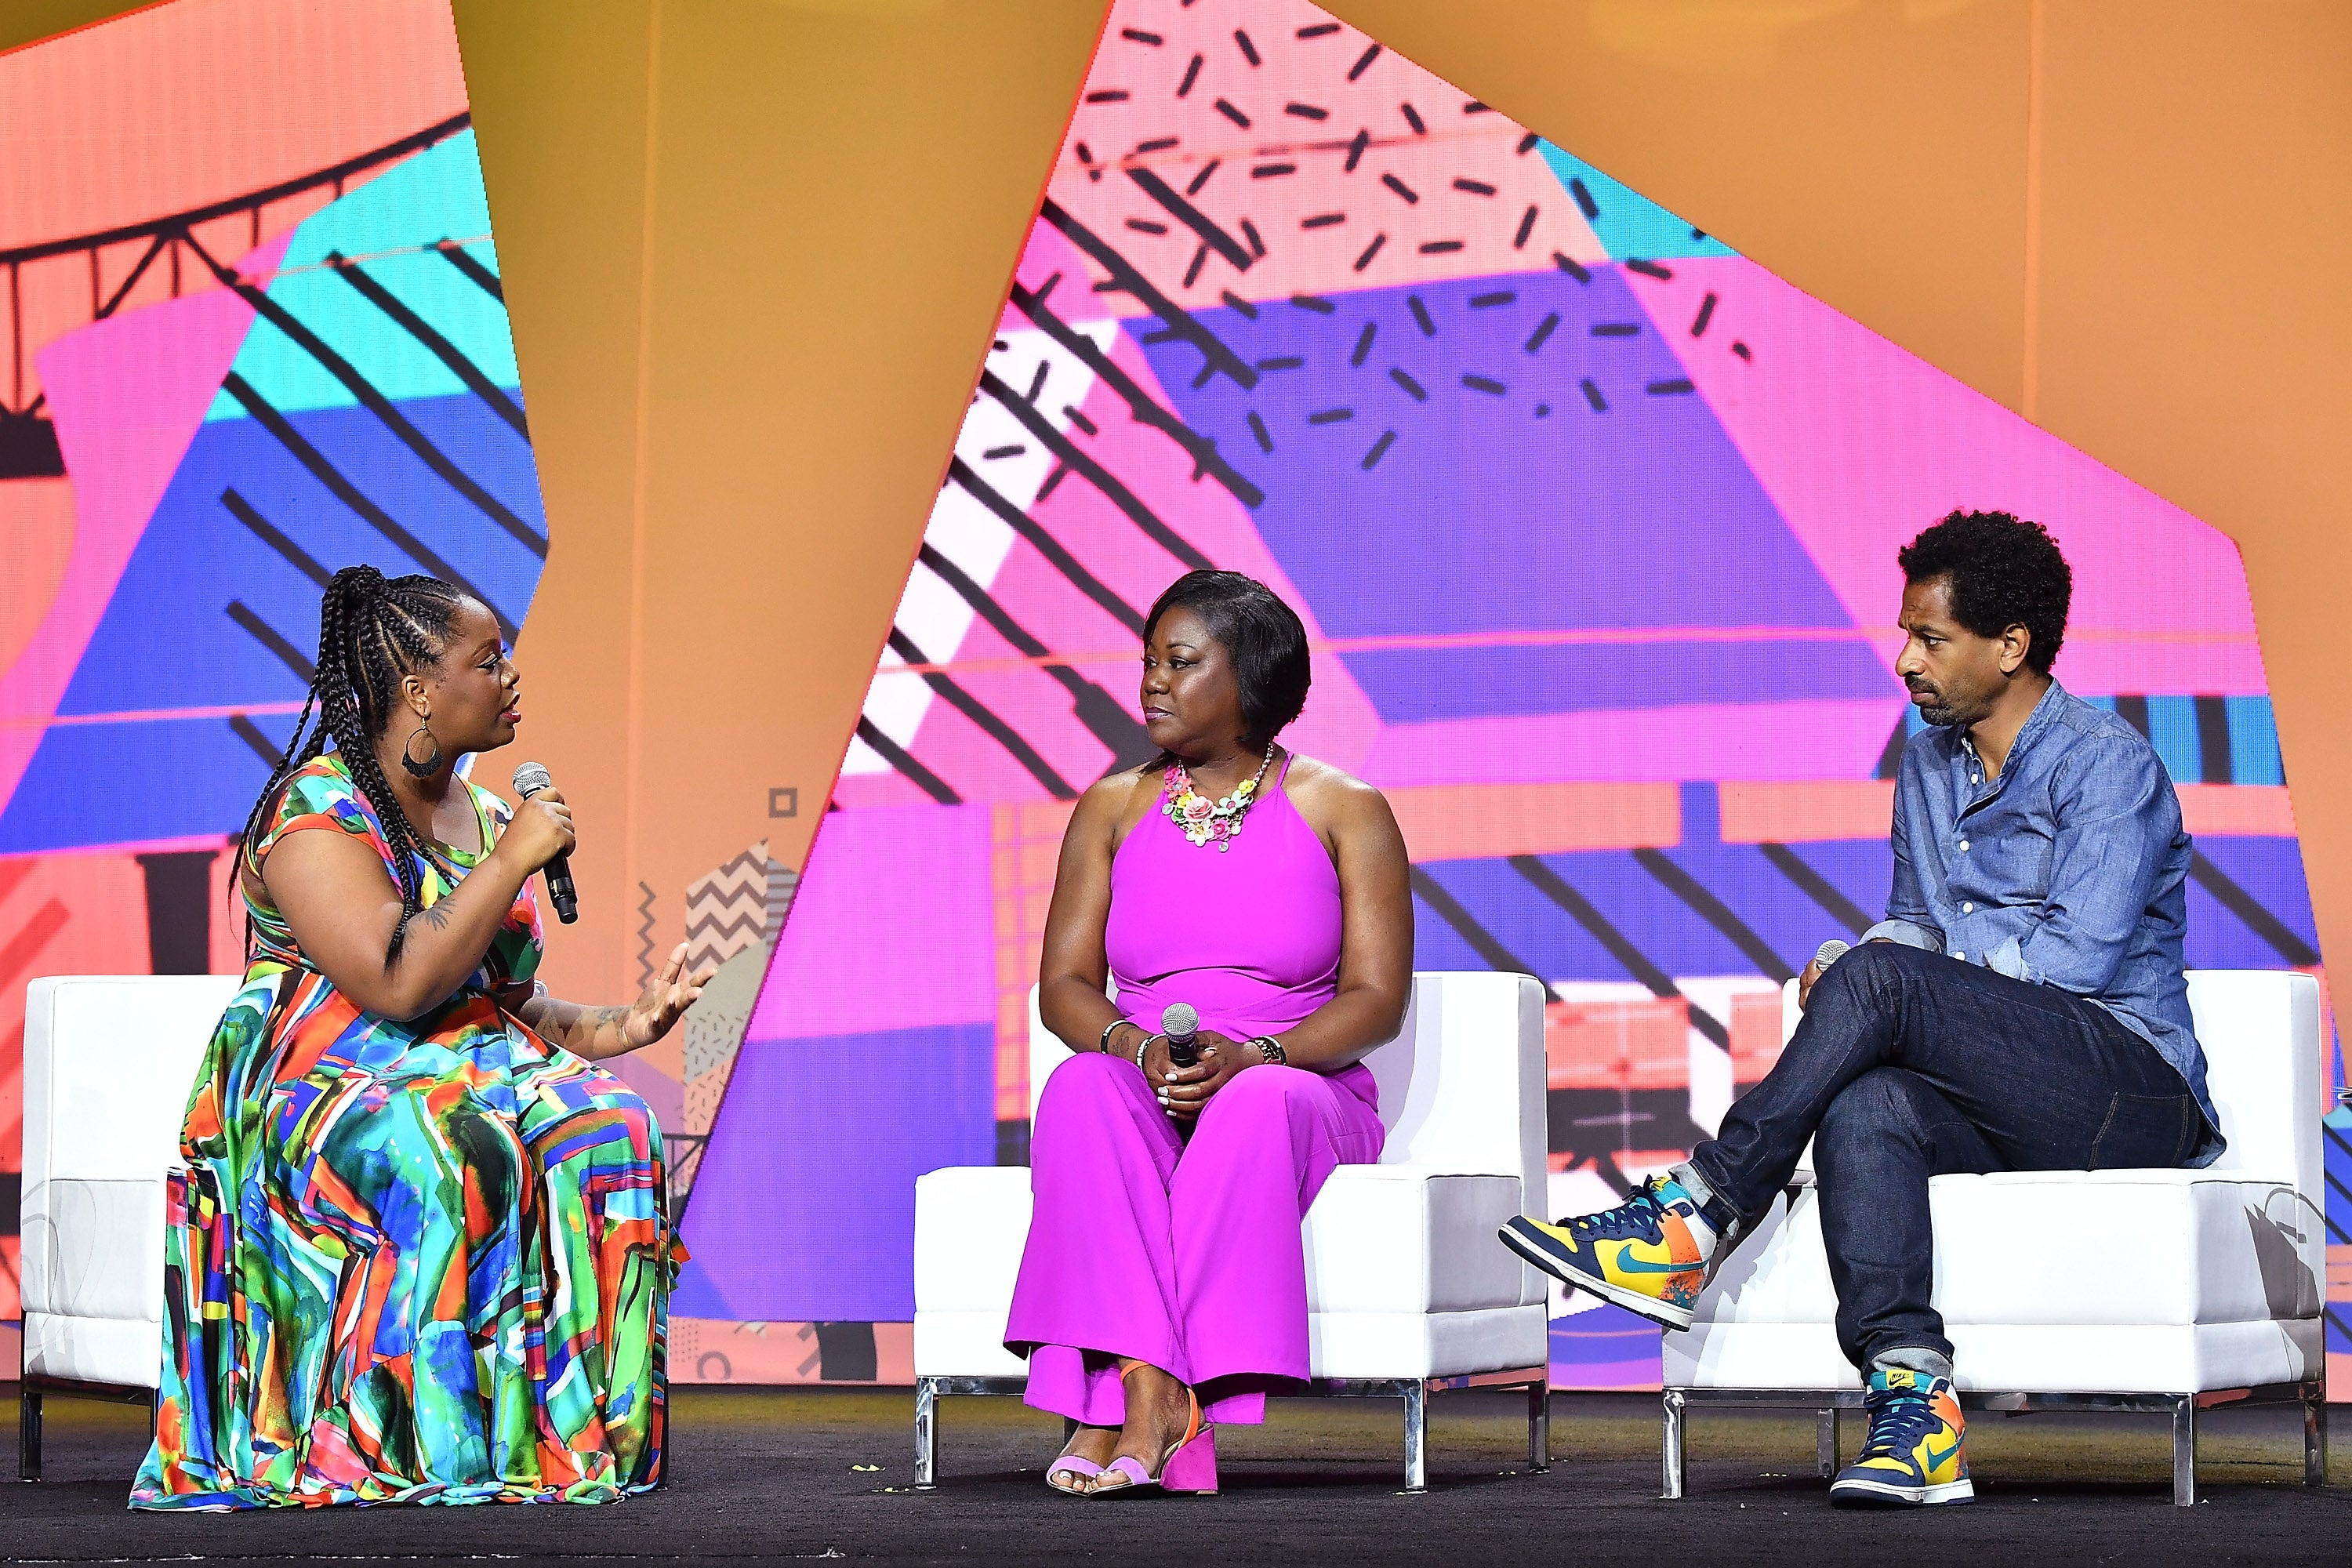 Patrisse Cullors And Sybrina Fulton Discuss 5 Years Of #BlackLivesMatter And The Work Still Left To Be Done
